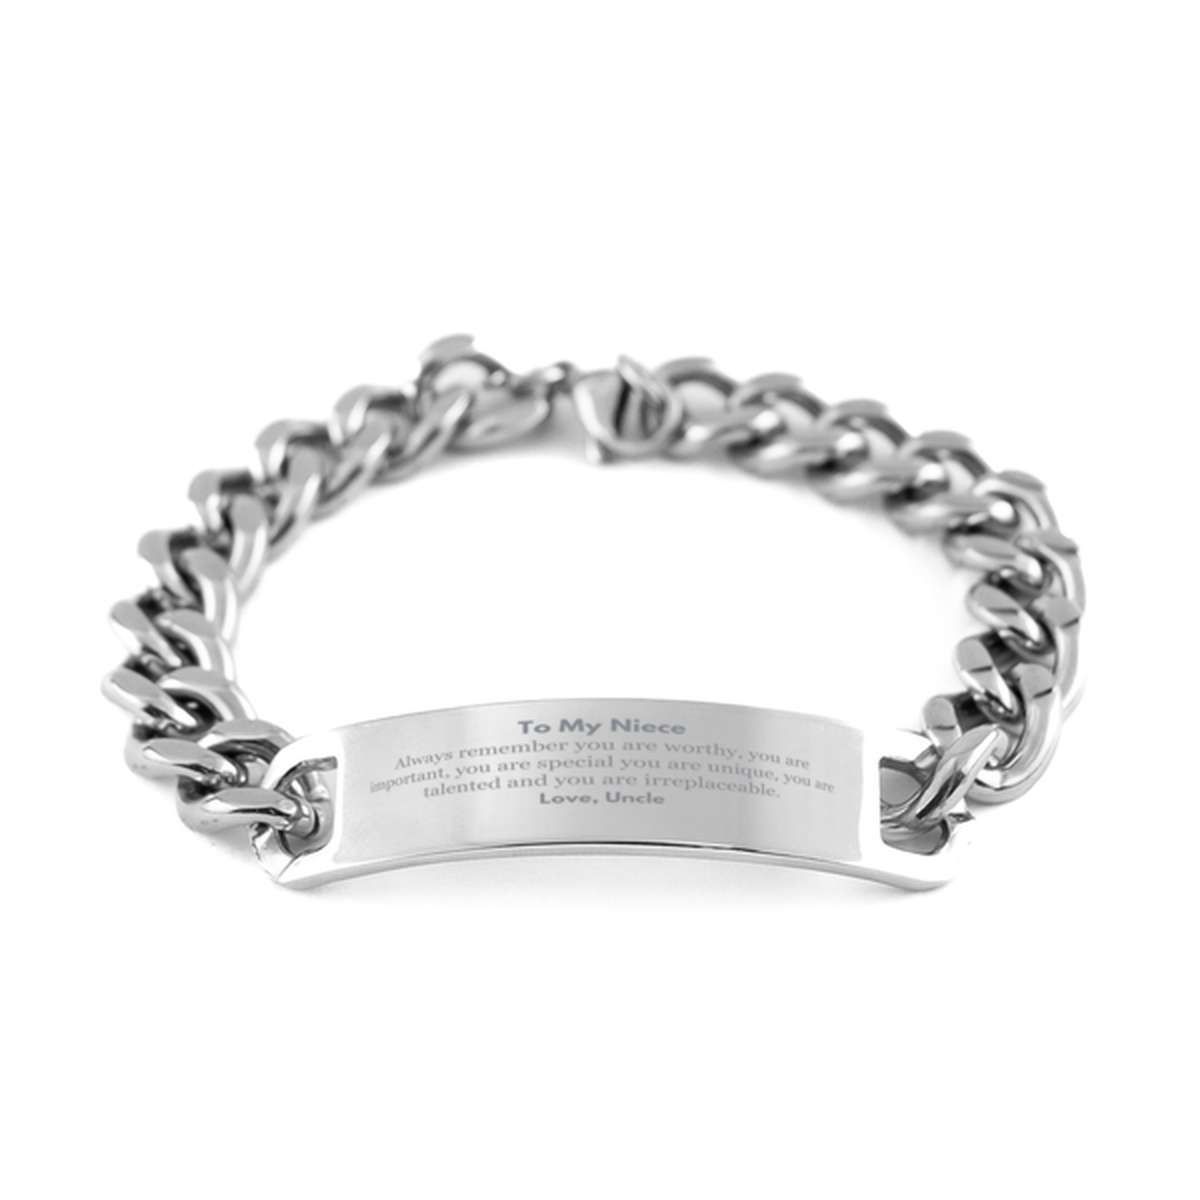 Niece Birthday Gifts from Uncle, Inspirational Cuban Chain Stainless Steel Bracelet for Niece Christmas Graduation Gifts for Niece Always remember you are worthy, you are important. Love, Uncle